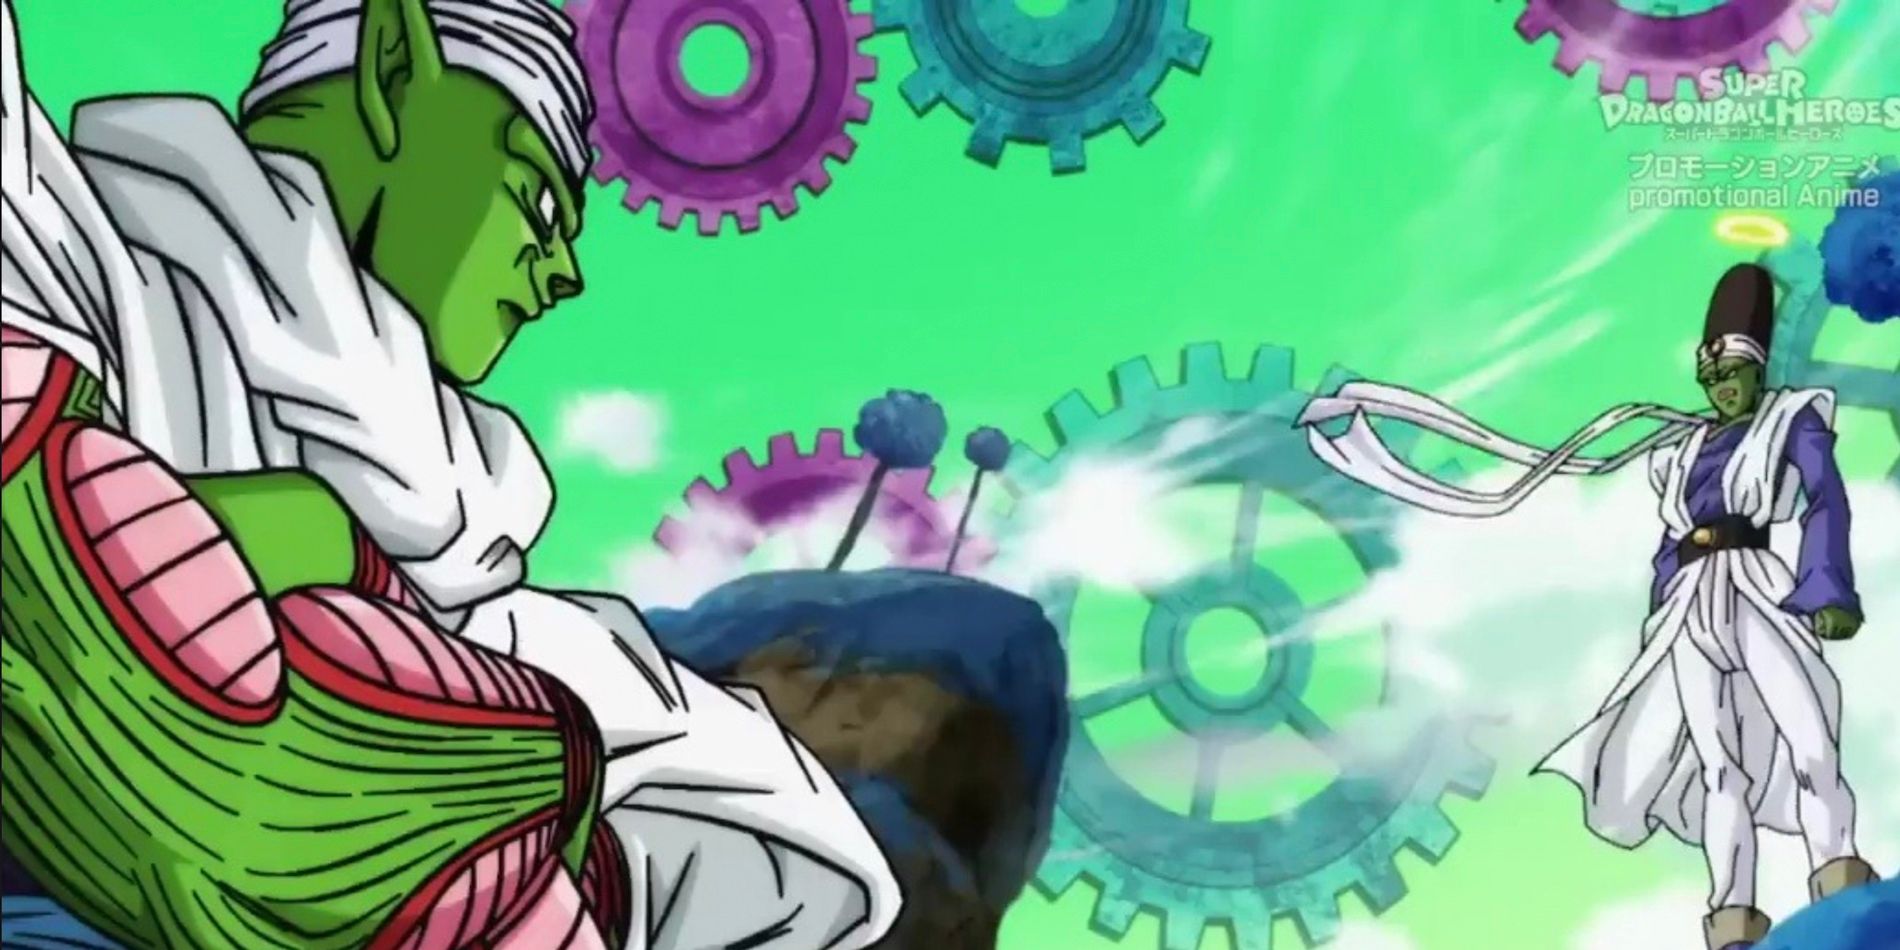 Piccolo takes on Pikkon in Super Dragon Ball Heroes' Super Space-Time Tournament